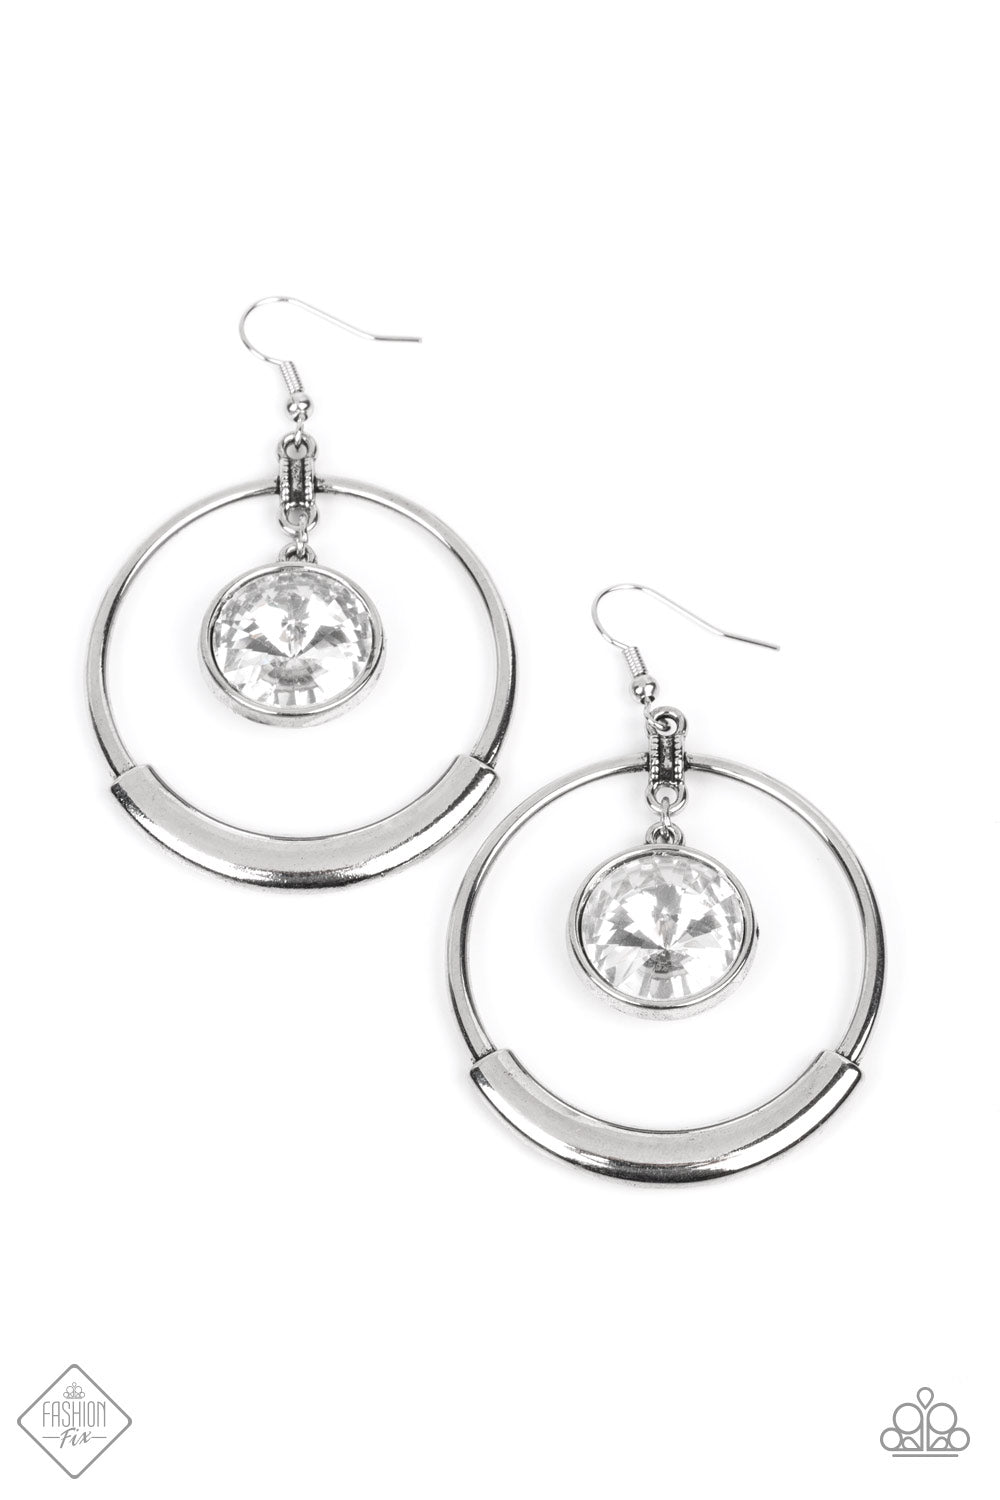 Urban Echo - White and Silver Fashion Earrings - Paparazzi Accessories - An oversized white gem glimmers brilliantly as it swings from the top of a sleek silver hoop. A thick curved bar of silver lays along the bottom of the airy hoop, emphasizing the bold design stylish earrings.